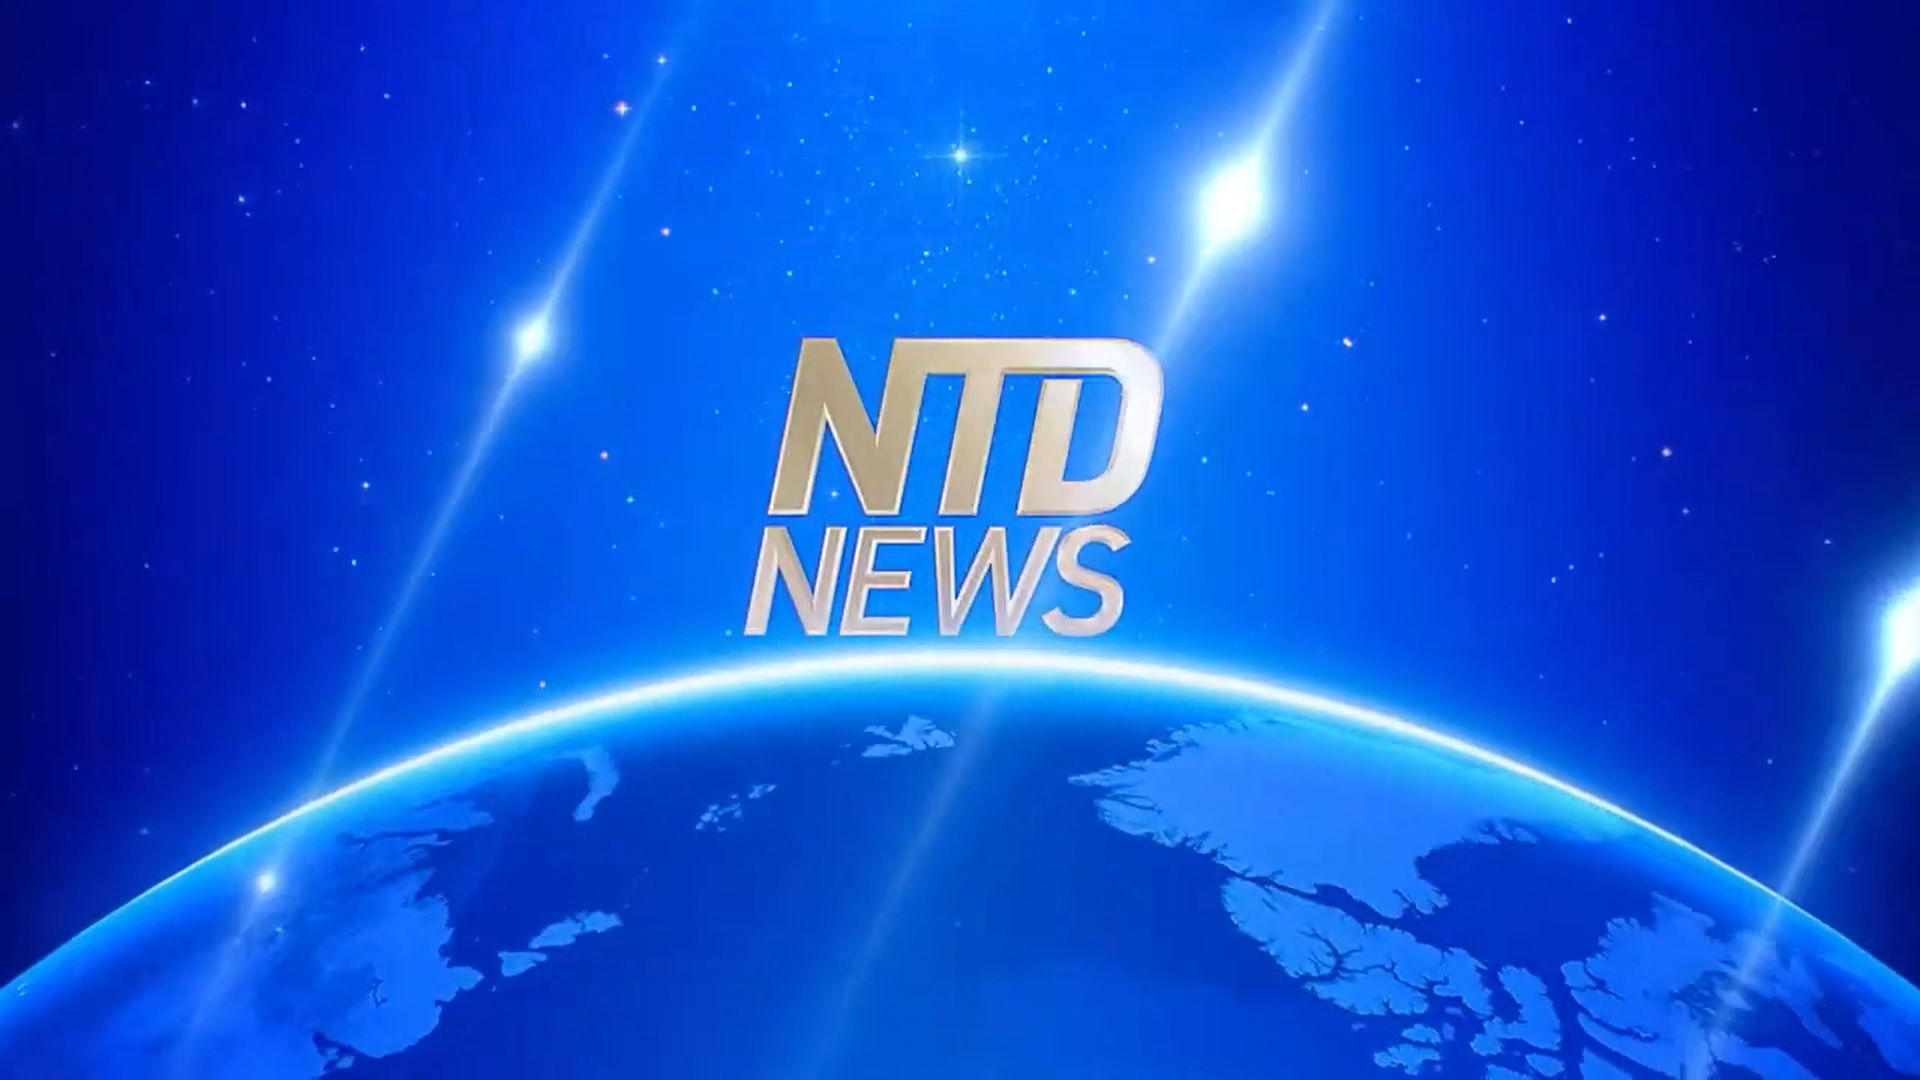 How Have Lockdowns Affected Most Americans Larry Sharpe On Ntd News February 9 2021